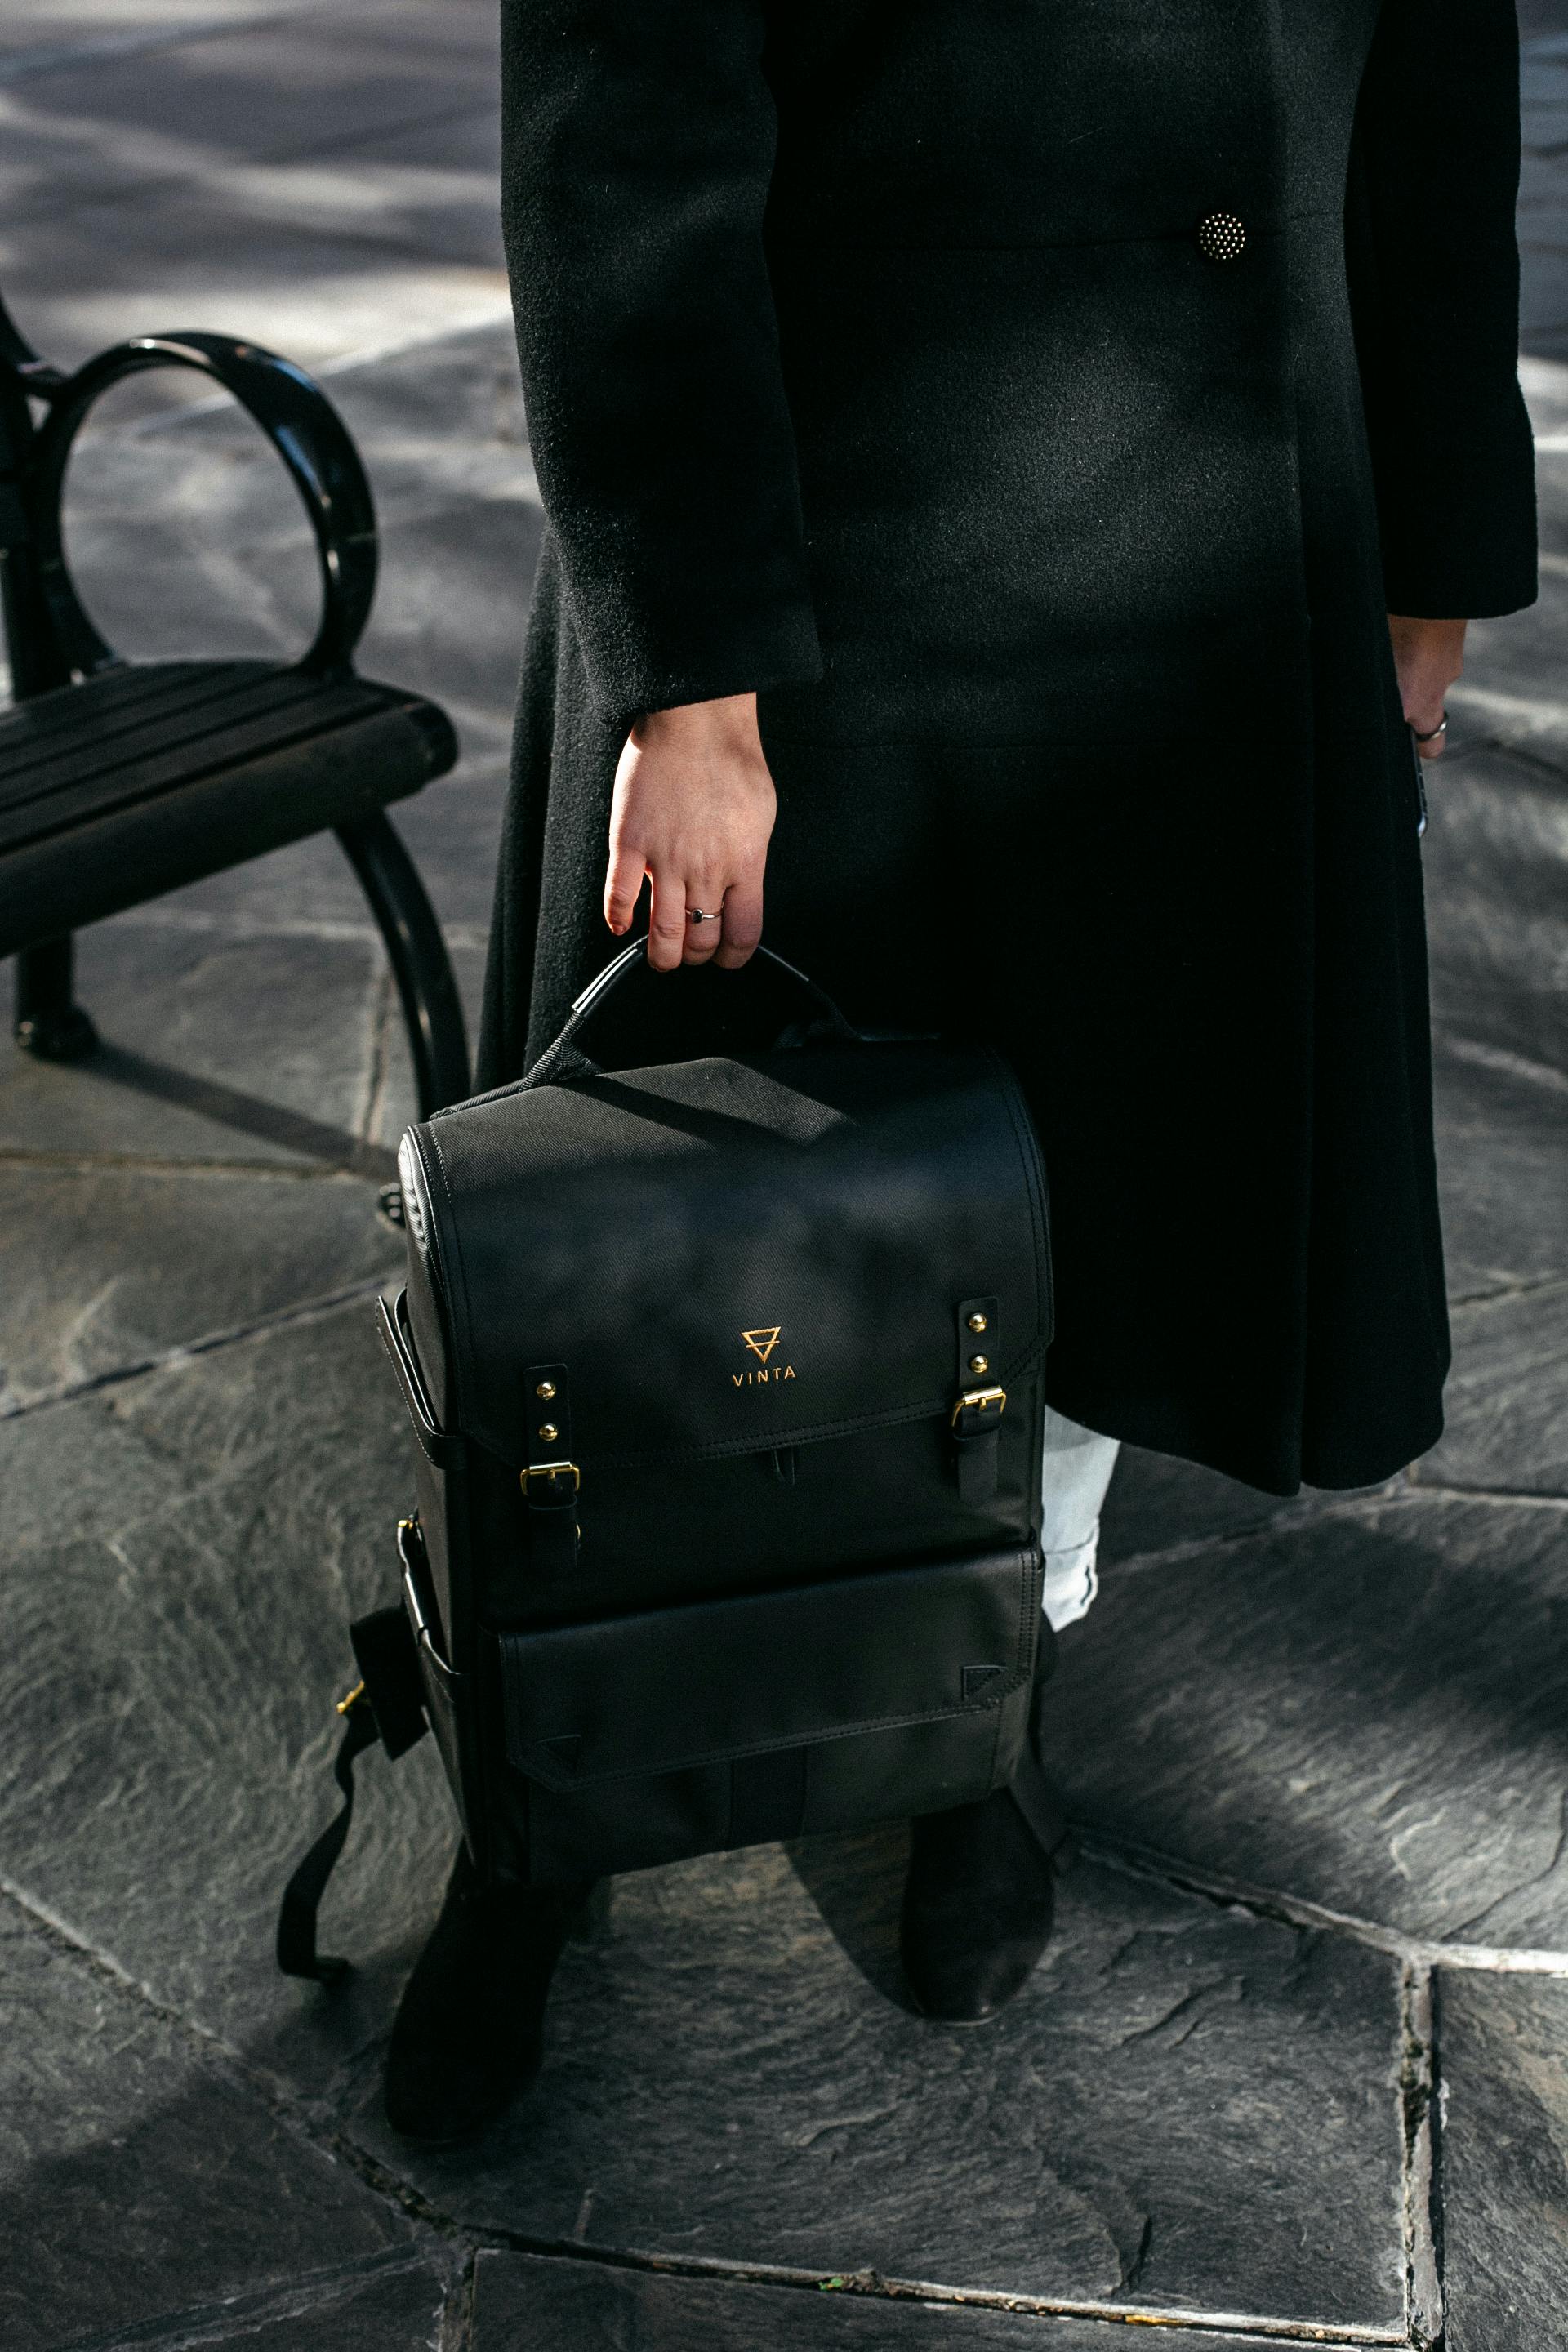 A woman holding a backpack | Source: Pexels